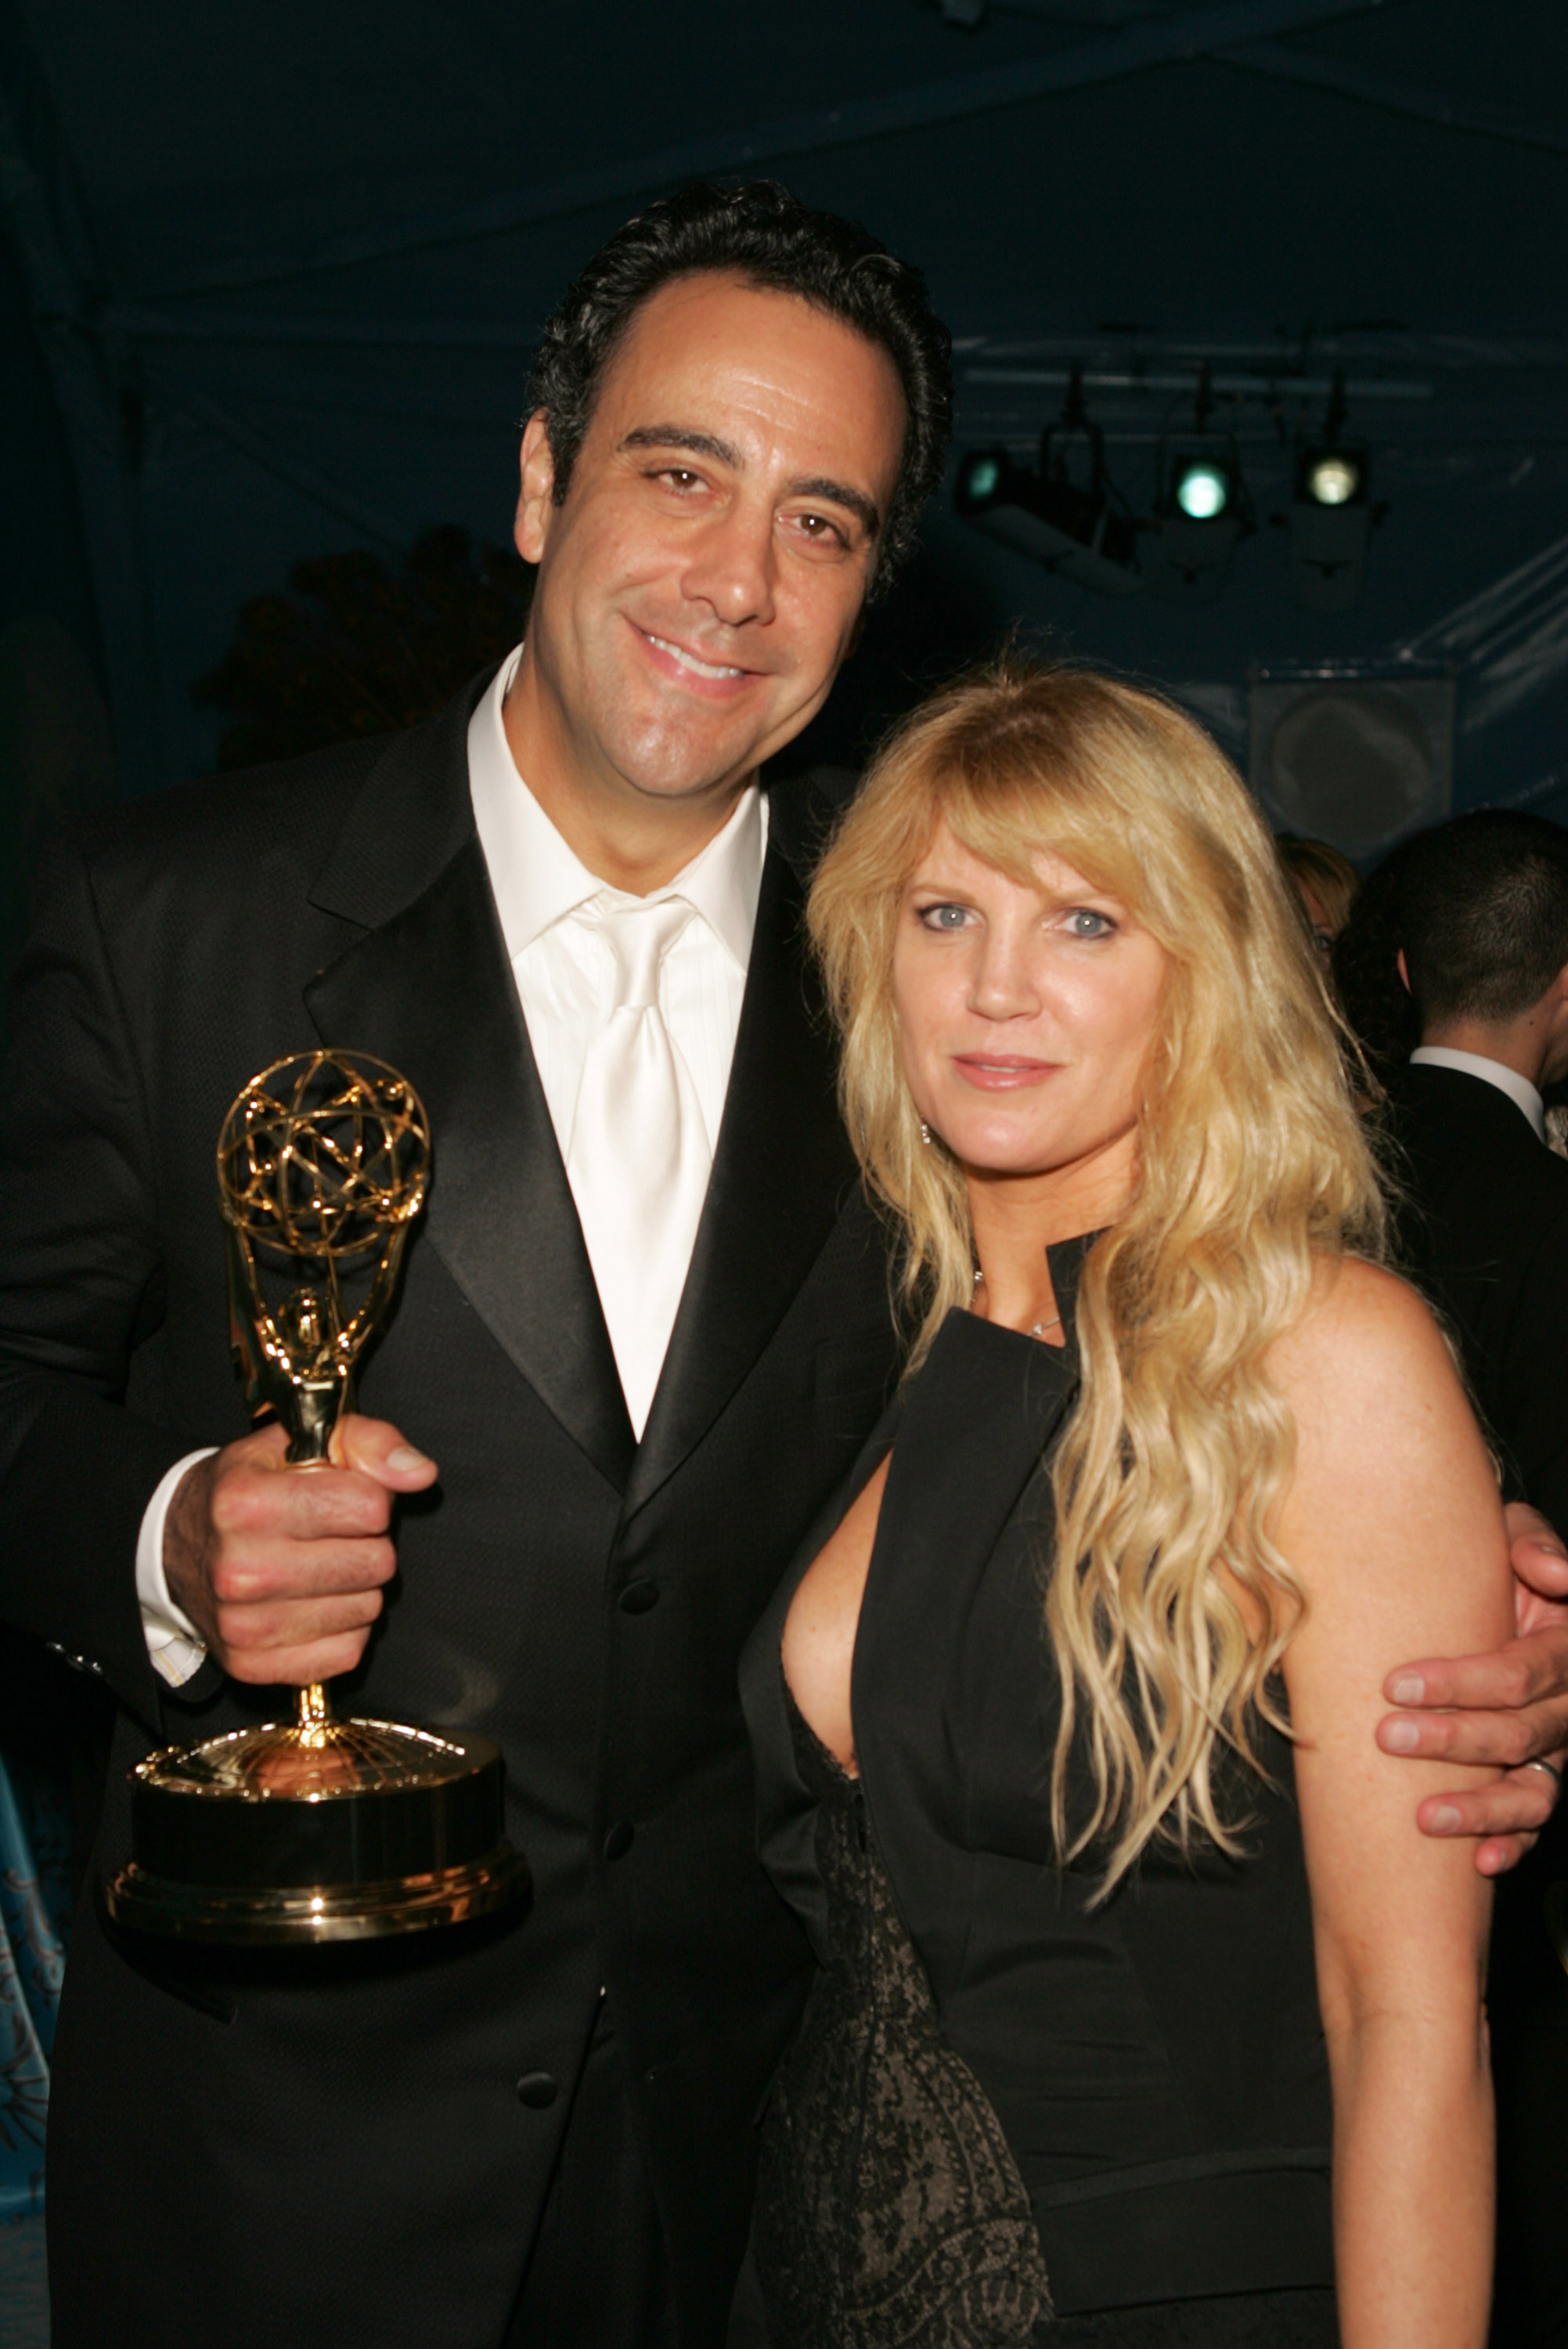 Brad Garrett and Jill Diven at The 57th Annual Emmy Awards HBO After Party on September 18, 2005, in Los Angeles, California. | Source: Getty Images